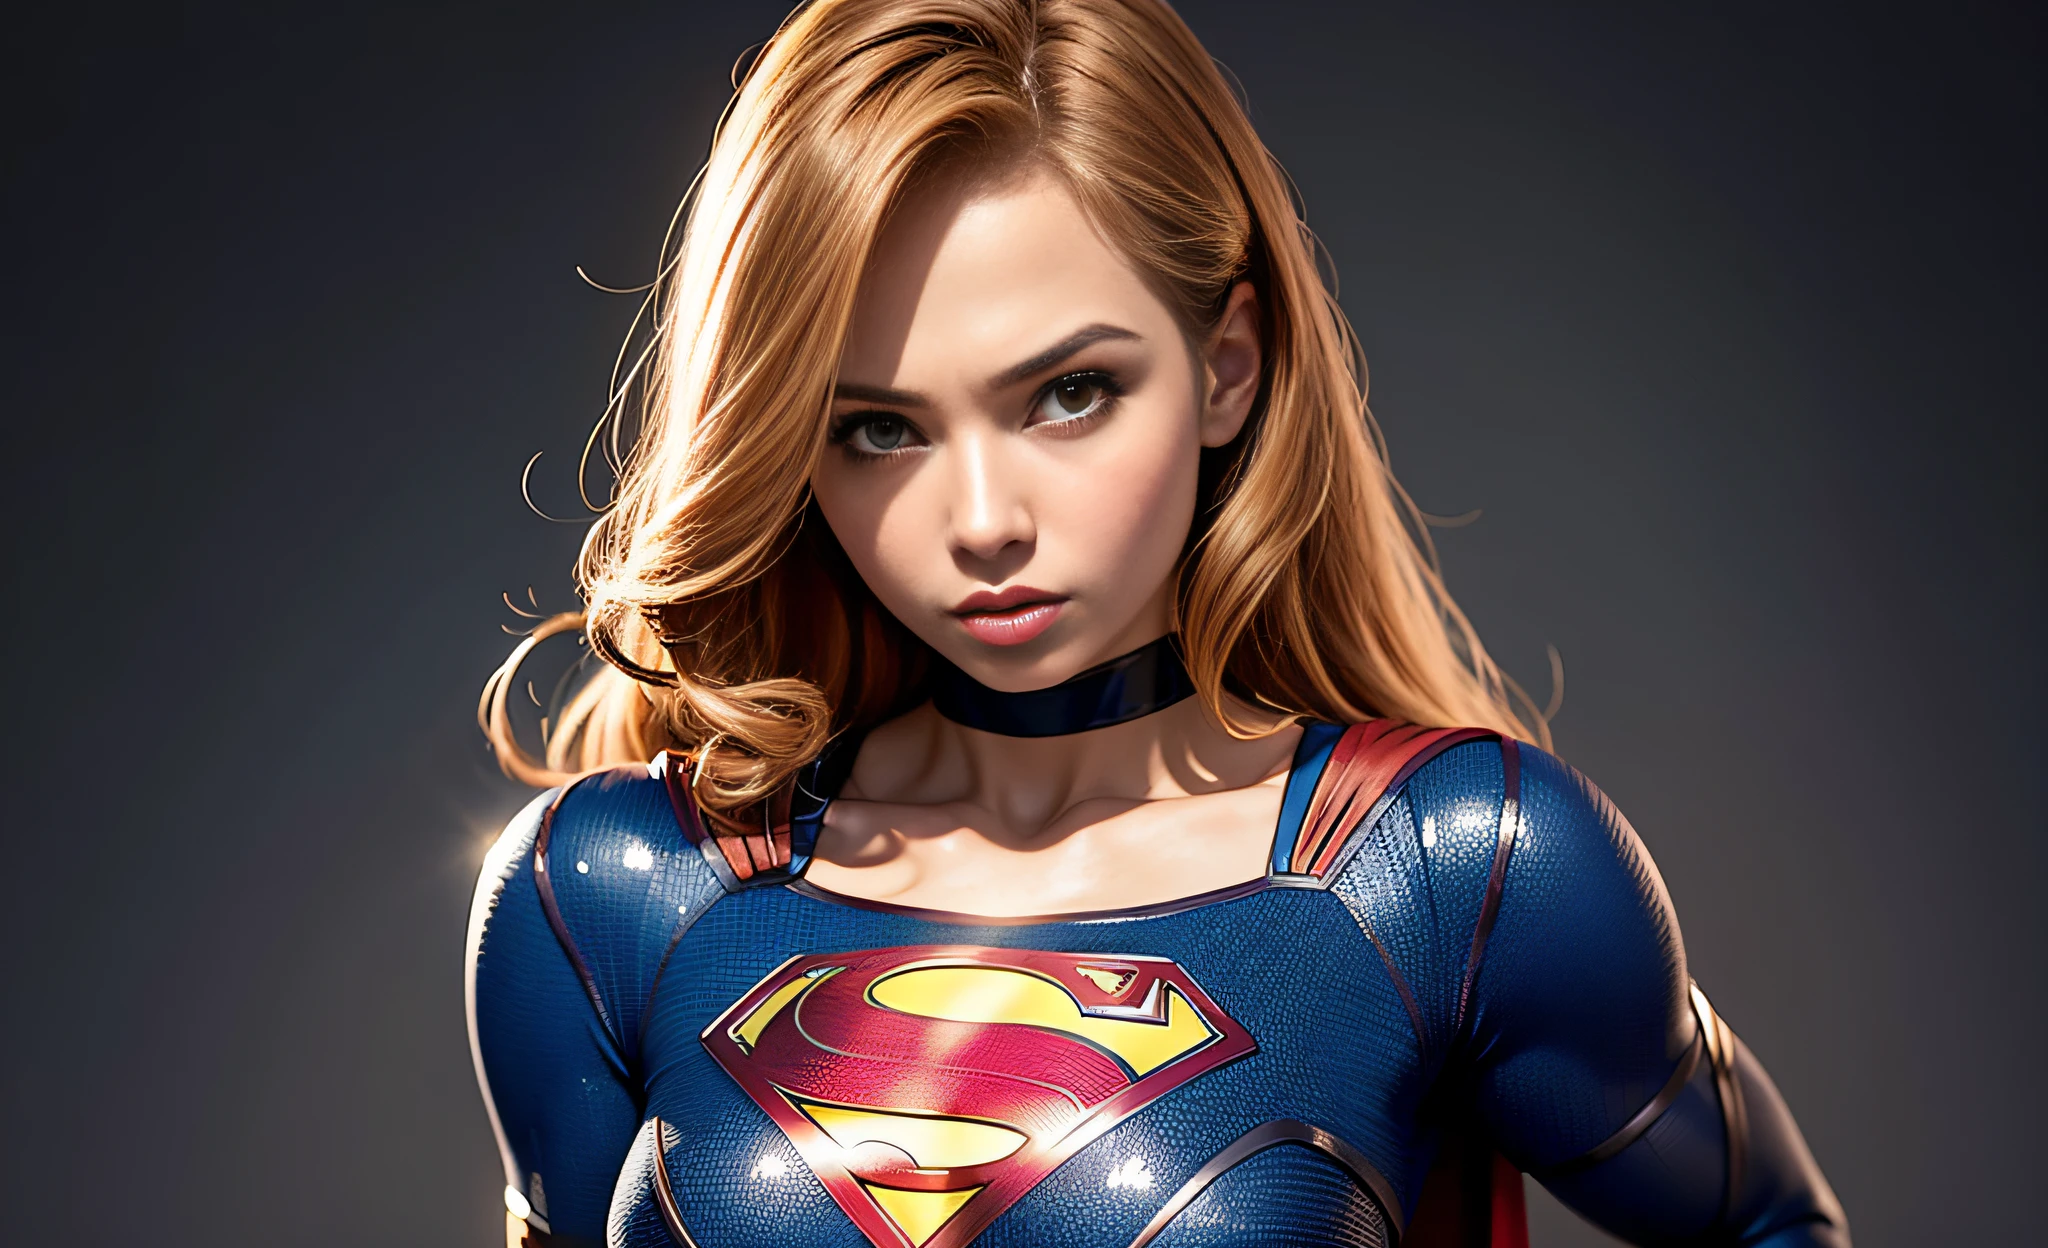 arafed woman in a superman costume posing for a picture, supergirl, superman pose, super hero pose, super-hero girl, superhero portrait, super model, super heroine costume, jessica nigri, superhero body, artgerm and lois van baarle, gal gadot as supergirl, super hero art, comic pinup style, artgerm moody photography,Face restoration,high definition,hyper realistic photography 4k full HD, with hyper realistic details,8k,Best quality,masterpiece,ultra detailed,official art,full body 8k extremely carved